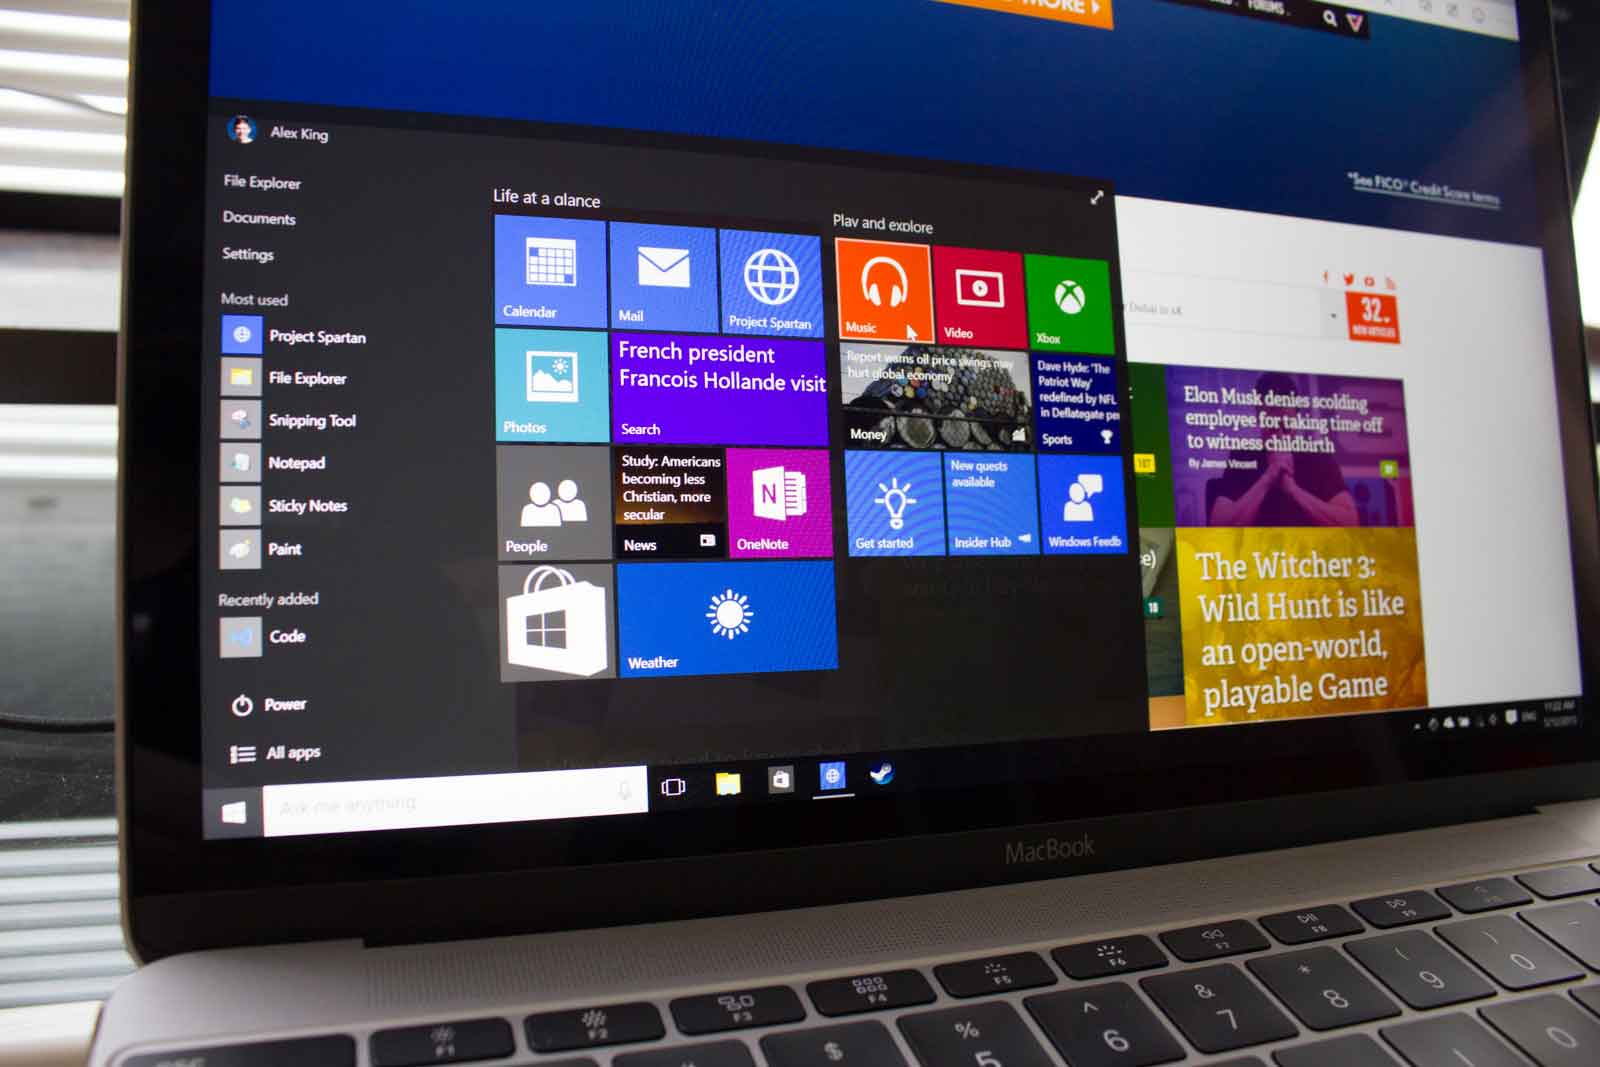 Microsoft Windows 10 will not only run on older PCs, but on older